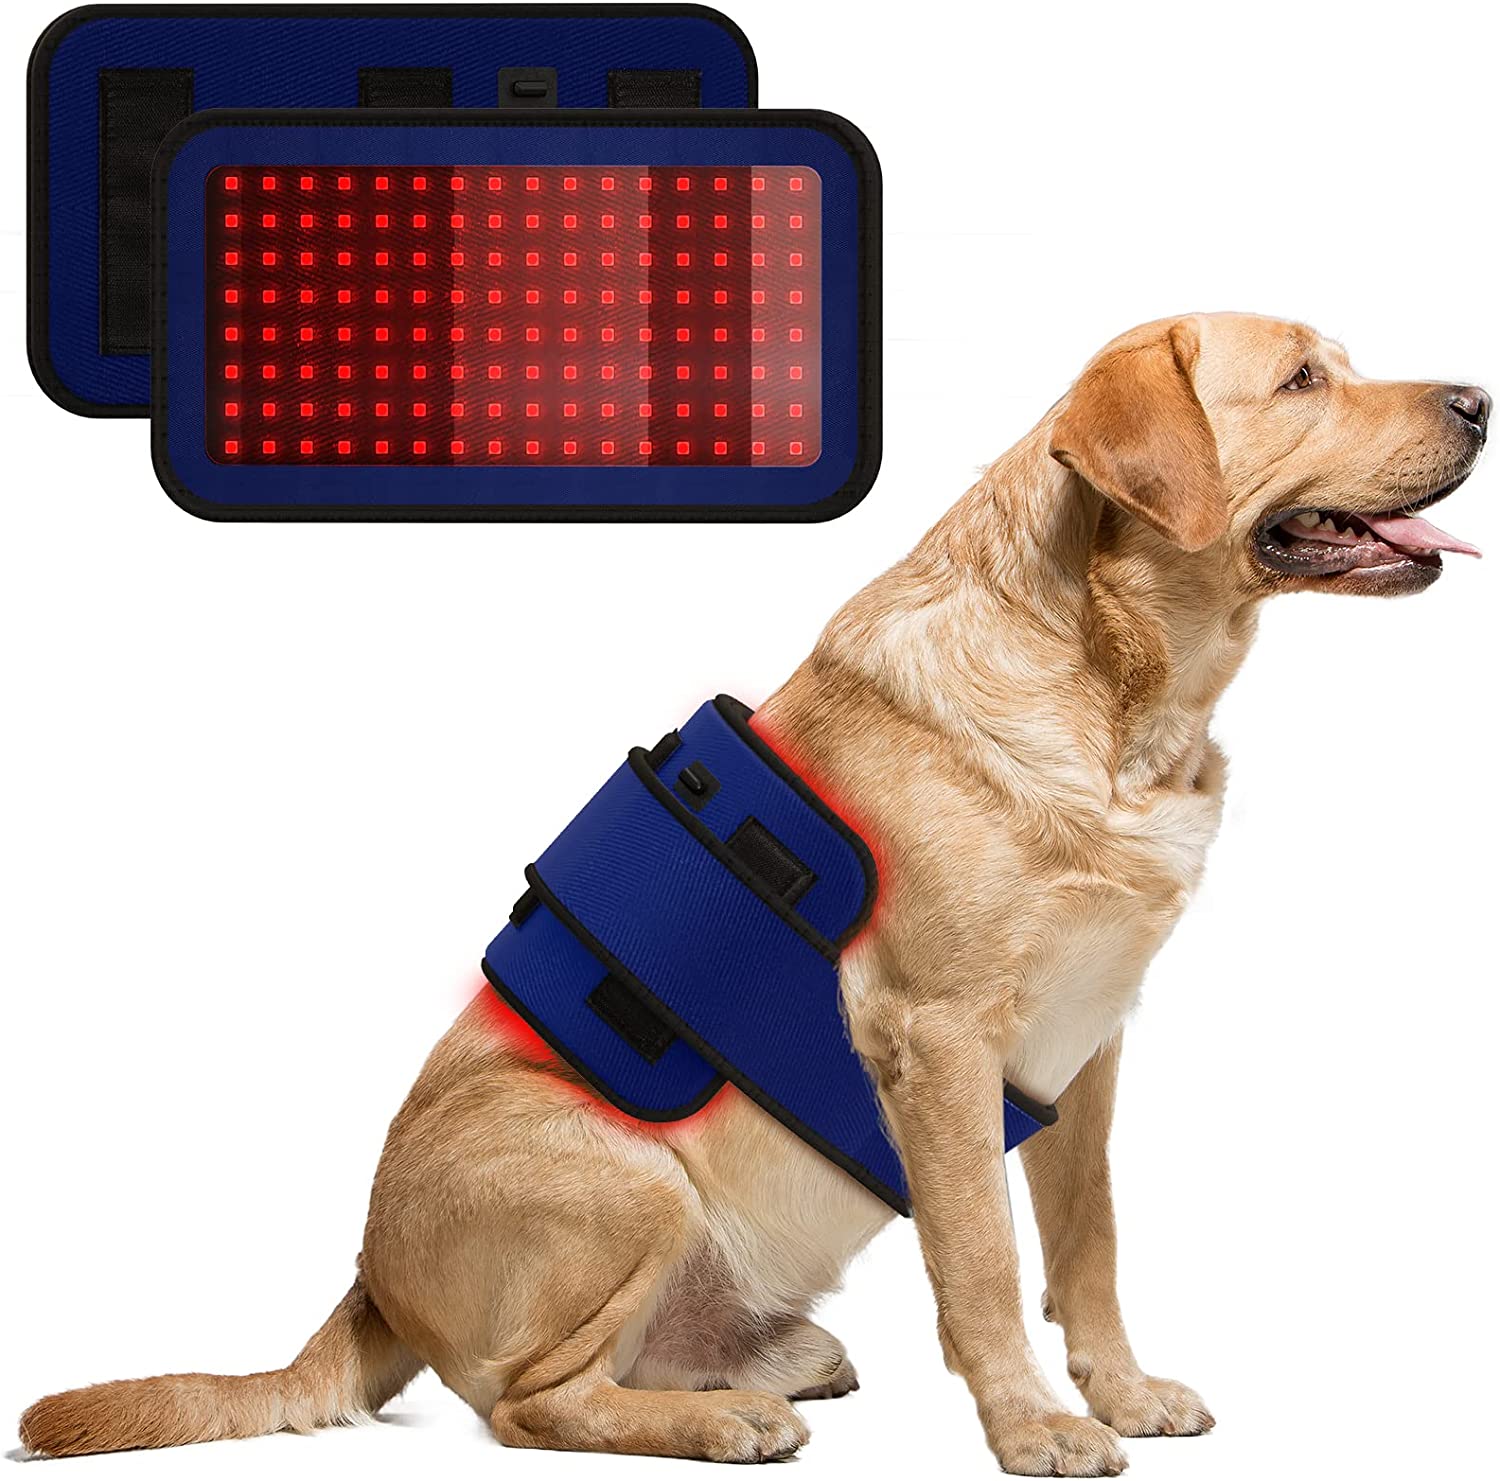 PUPCA Cold Laser Therapy Device for Dogs